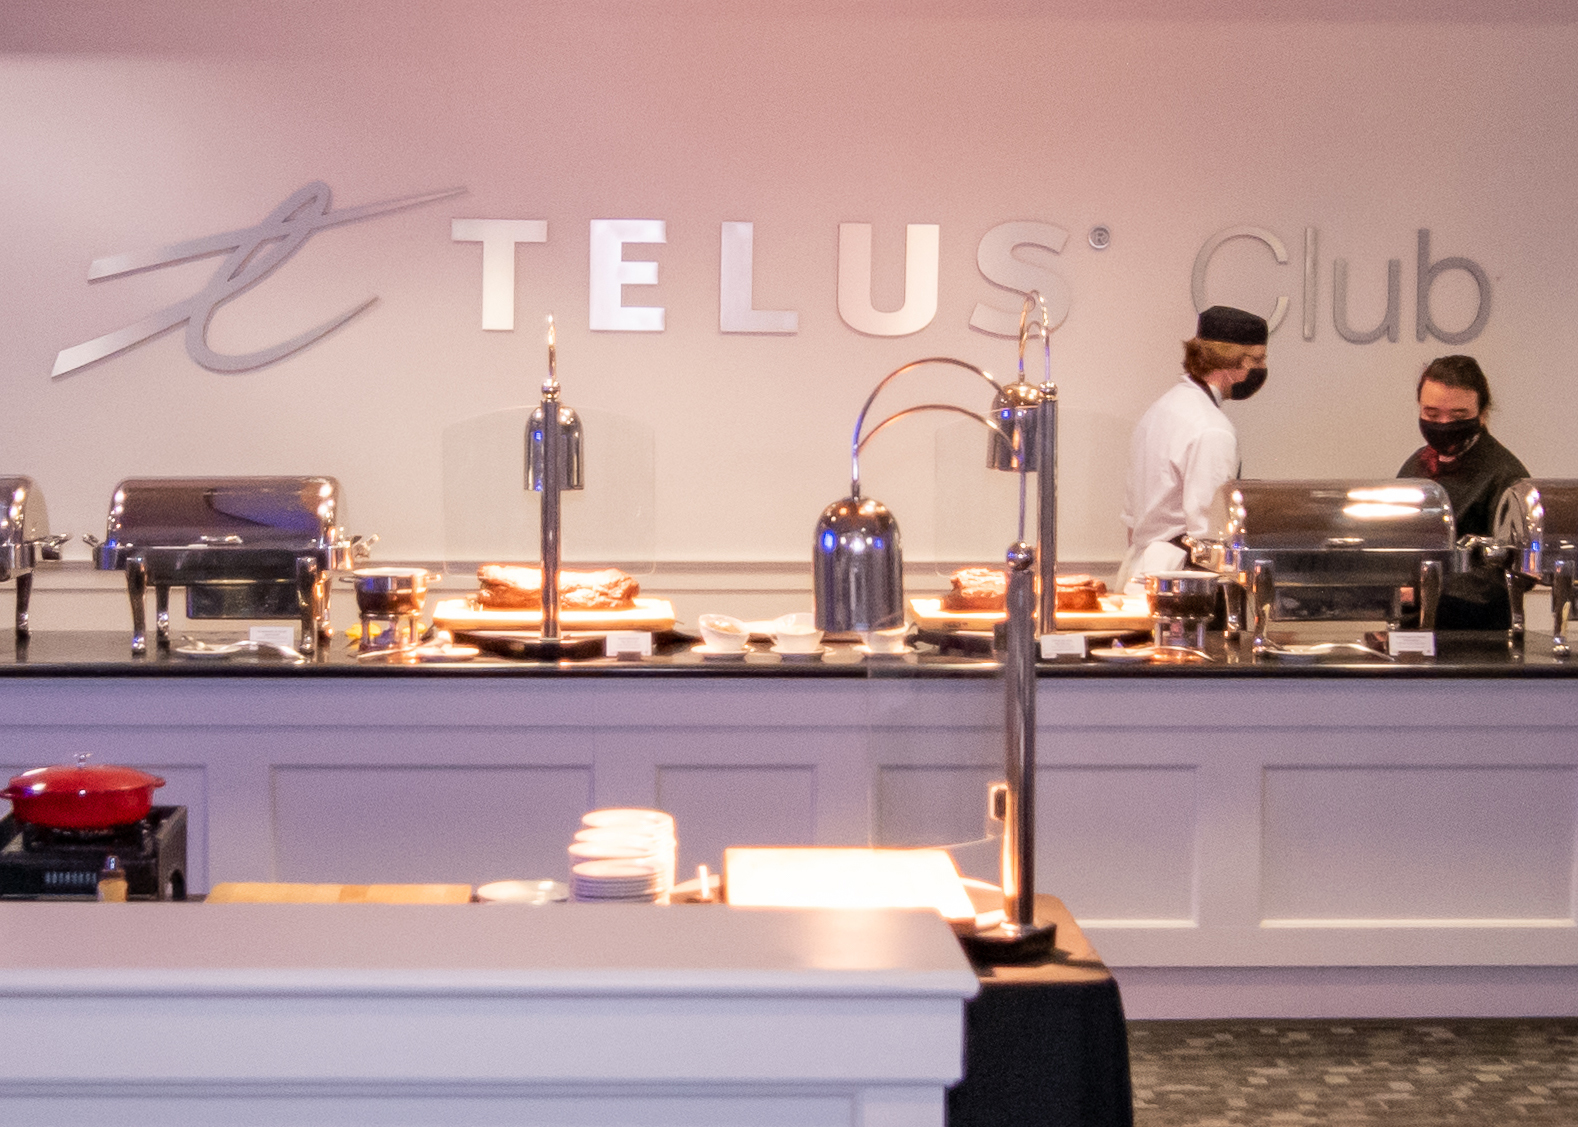 Inside the Telus Club, two chefs are standing behind the buffet table that is laid out with food, Telus Club logo is on the wall behind them